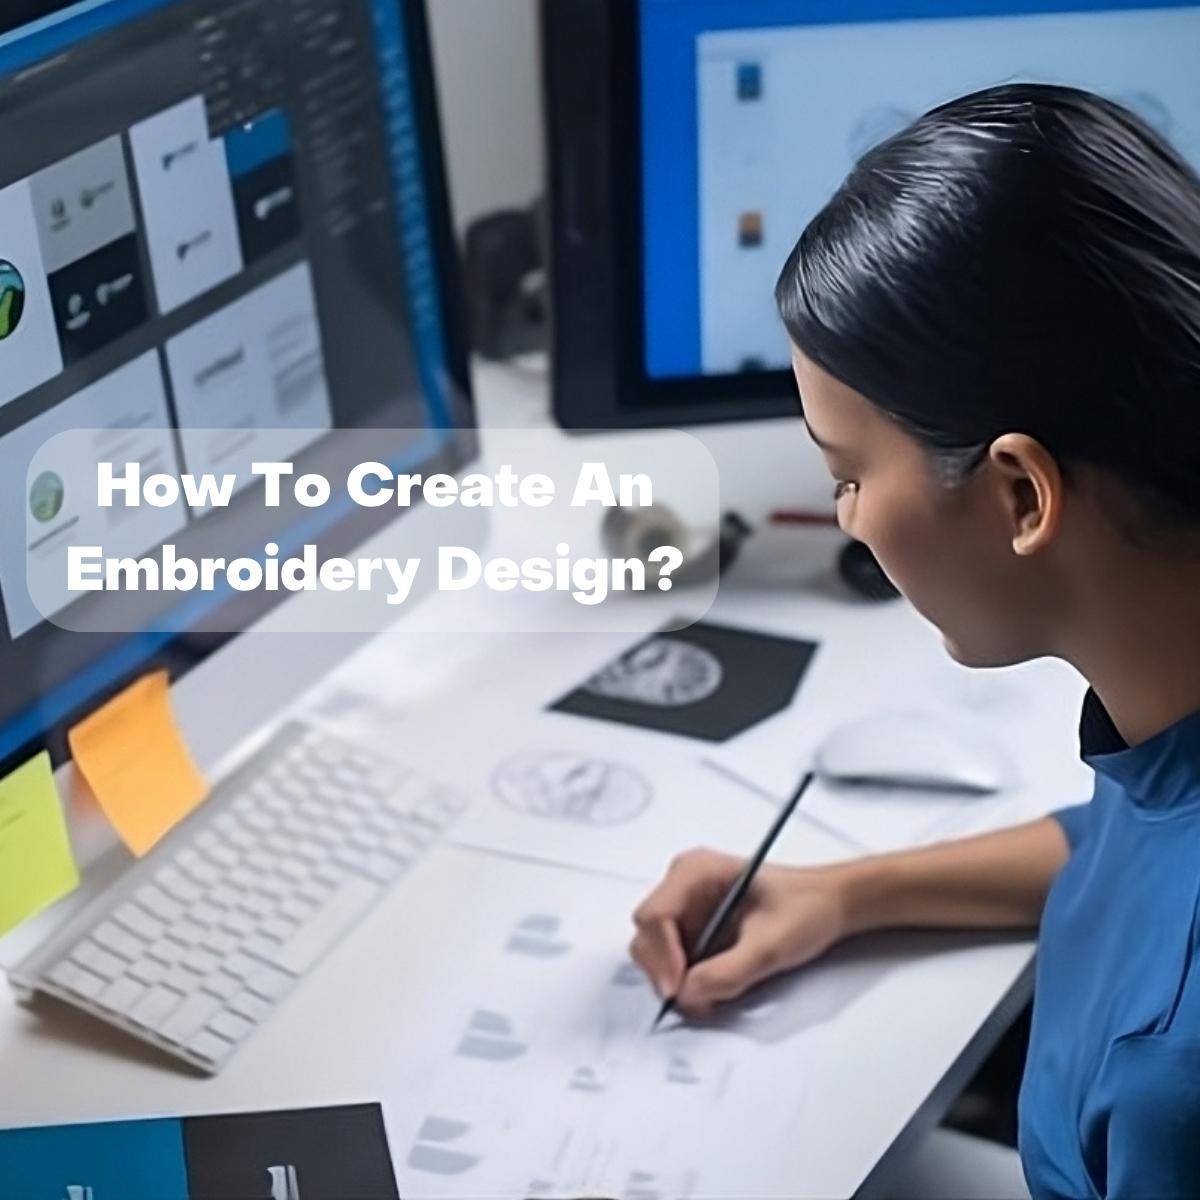 How To Create An Embroidery Design